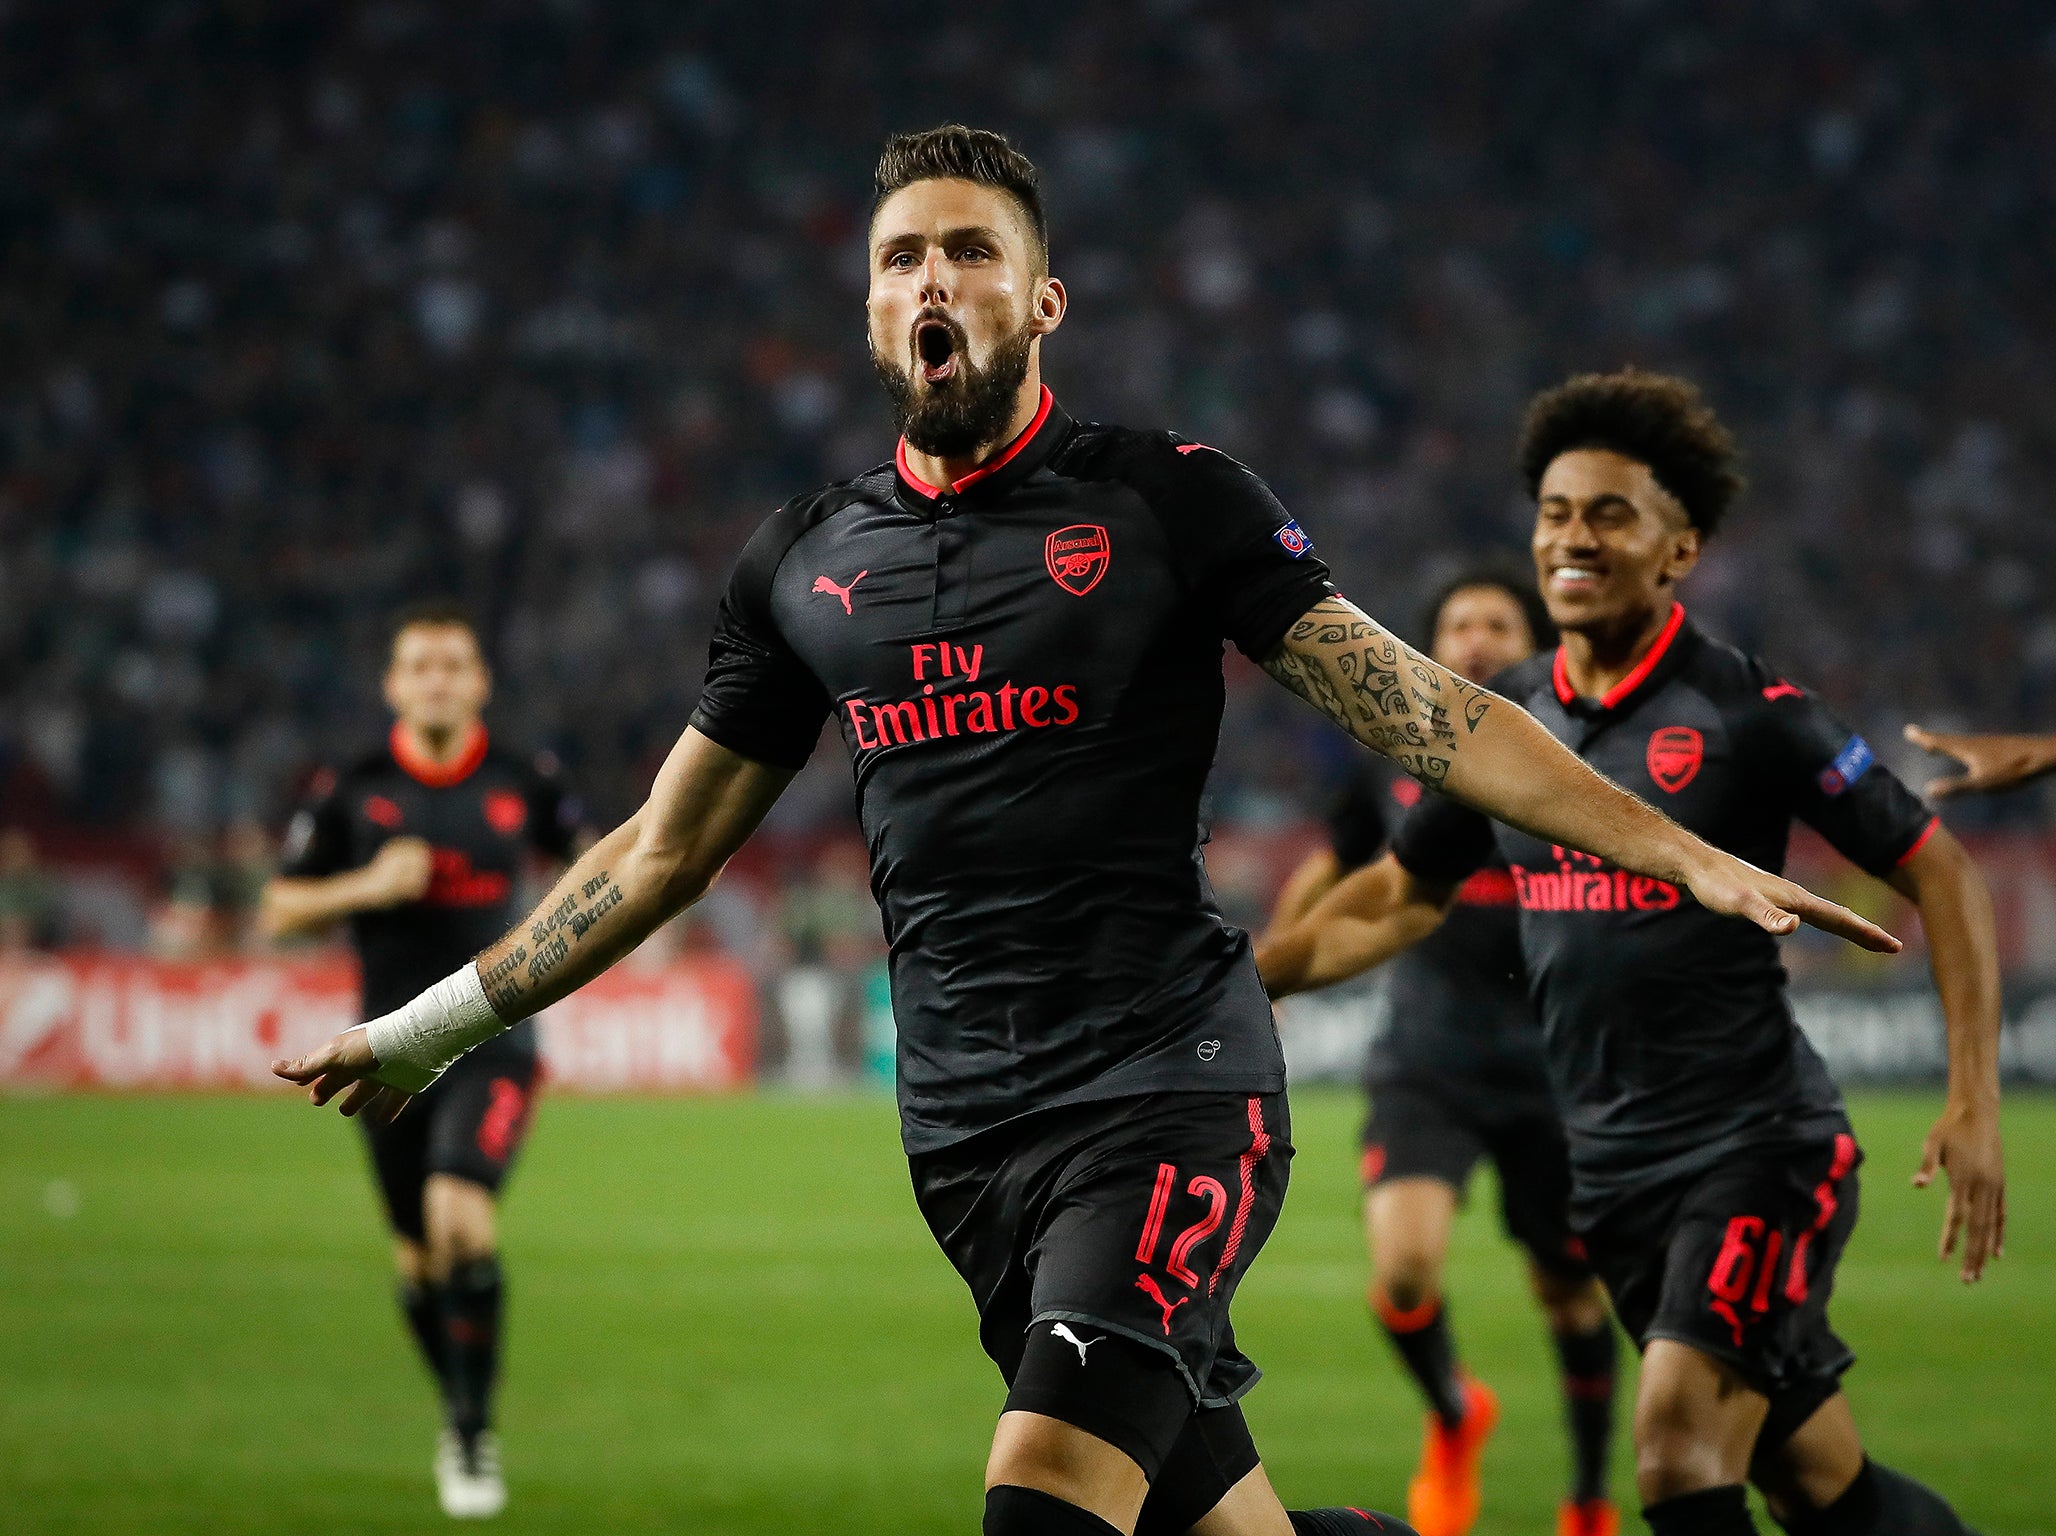 Olivier Giroud won the match with a sublime finish